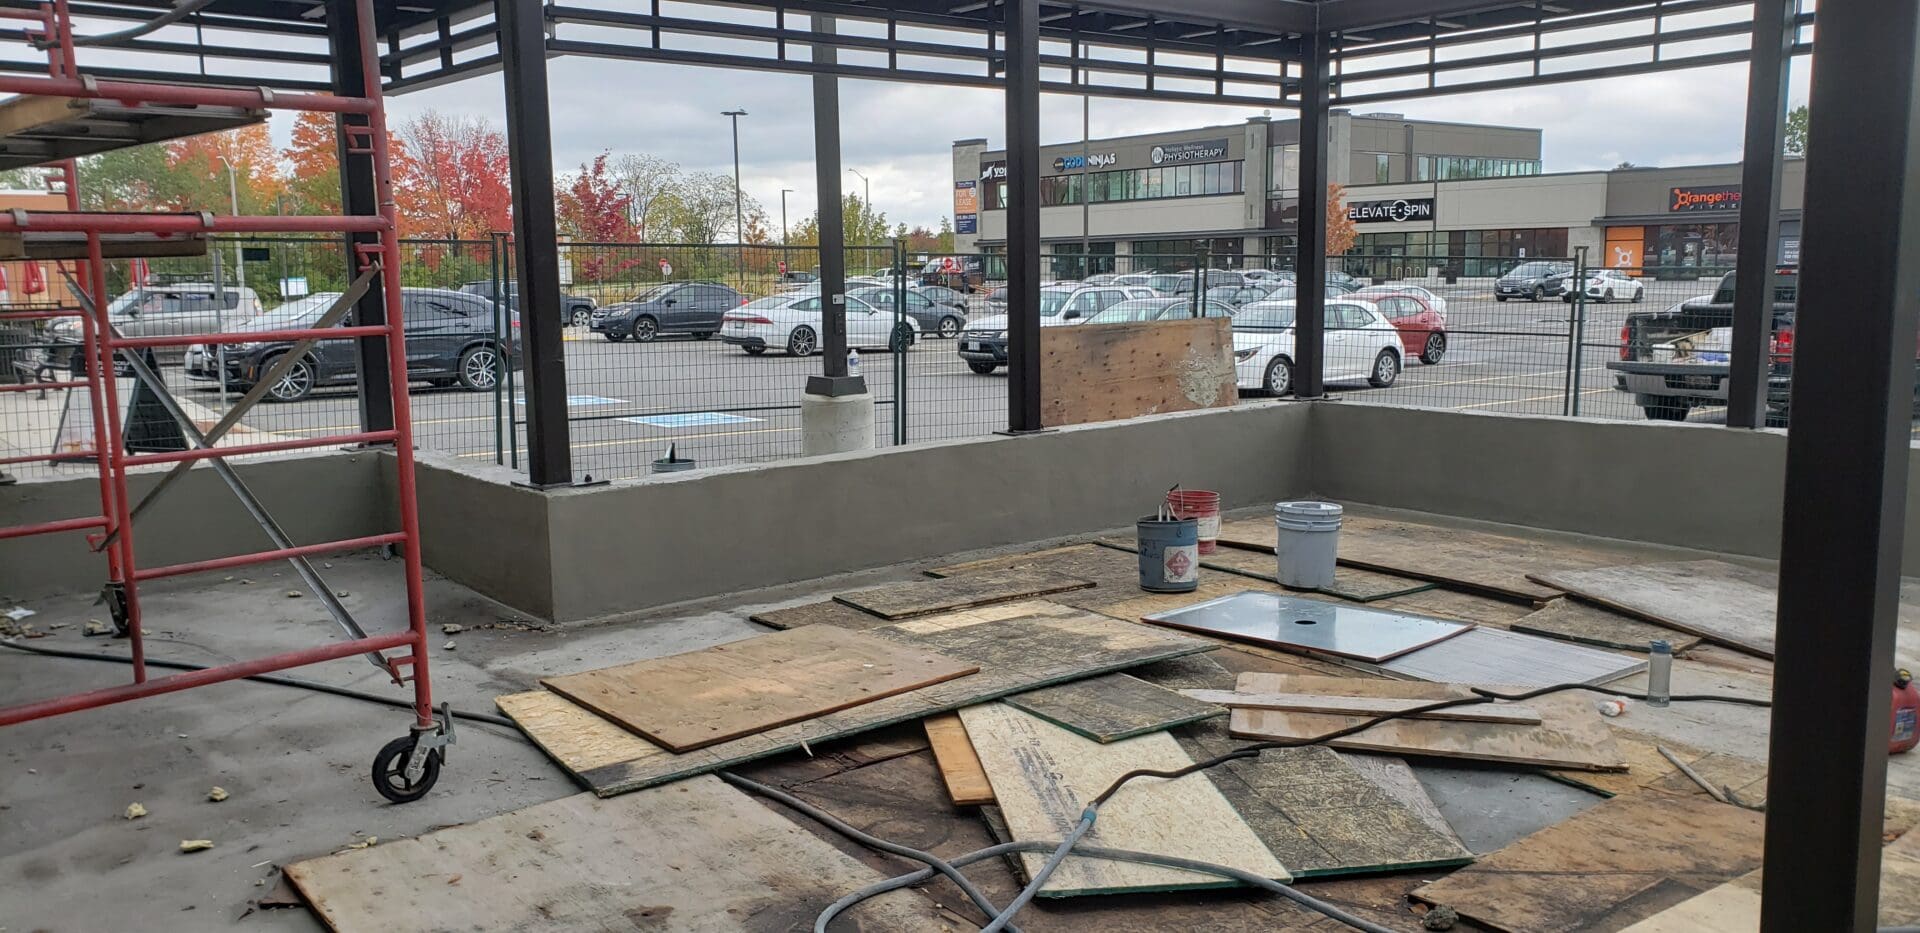 The view of an under-construction Browns Social House establishment from the inside